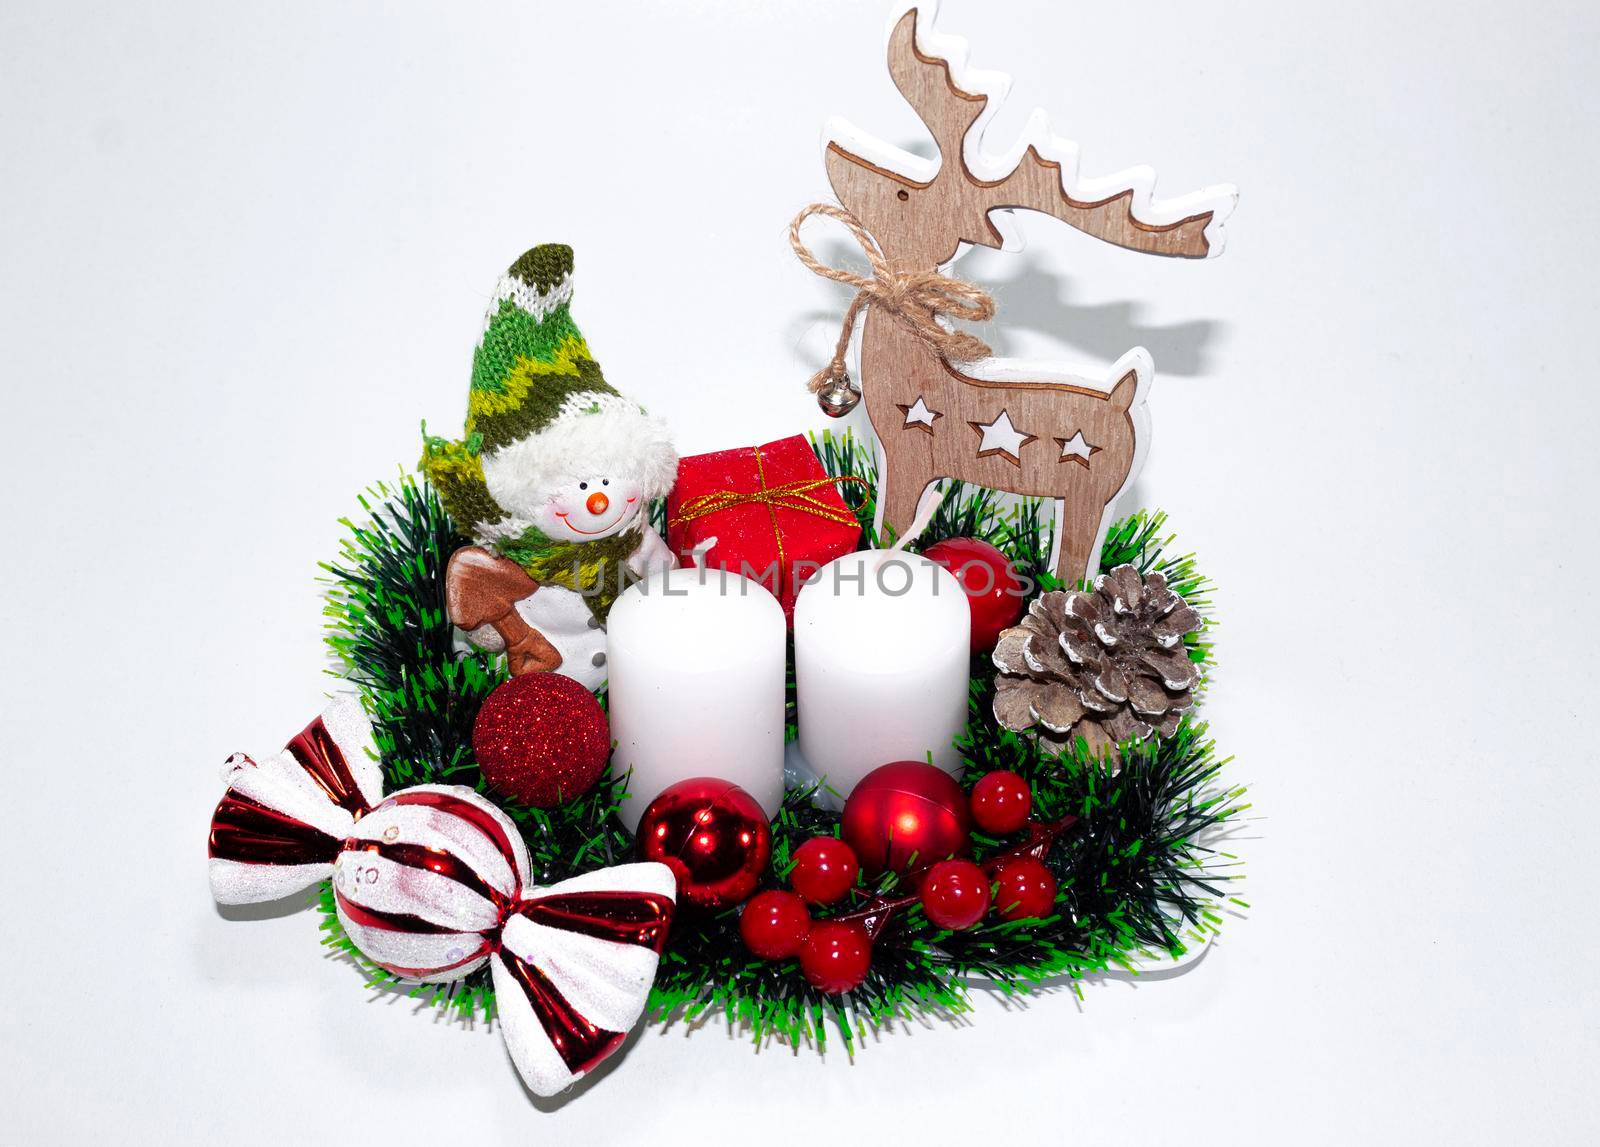 Homemade Christmas decorations with candy and candles by bybyphotography